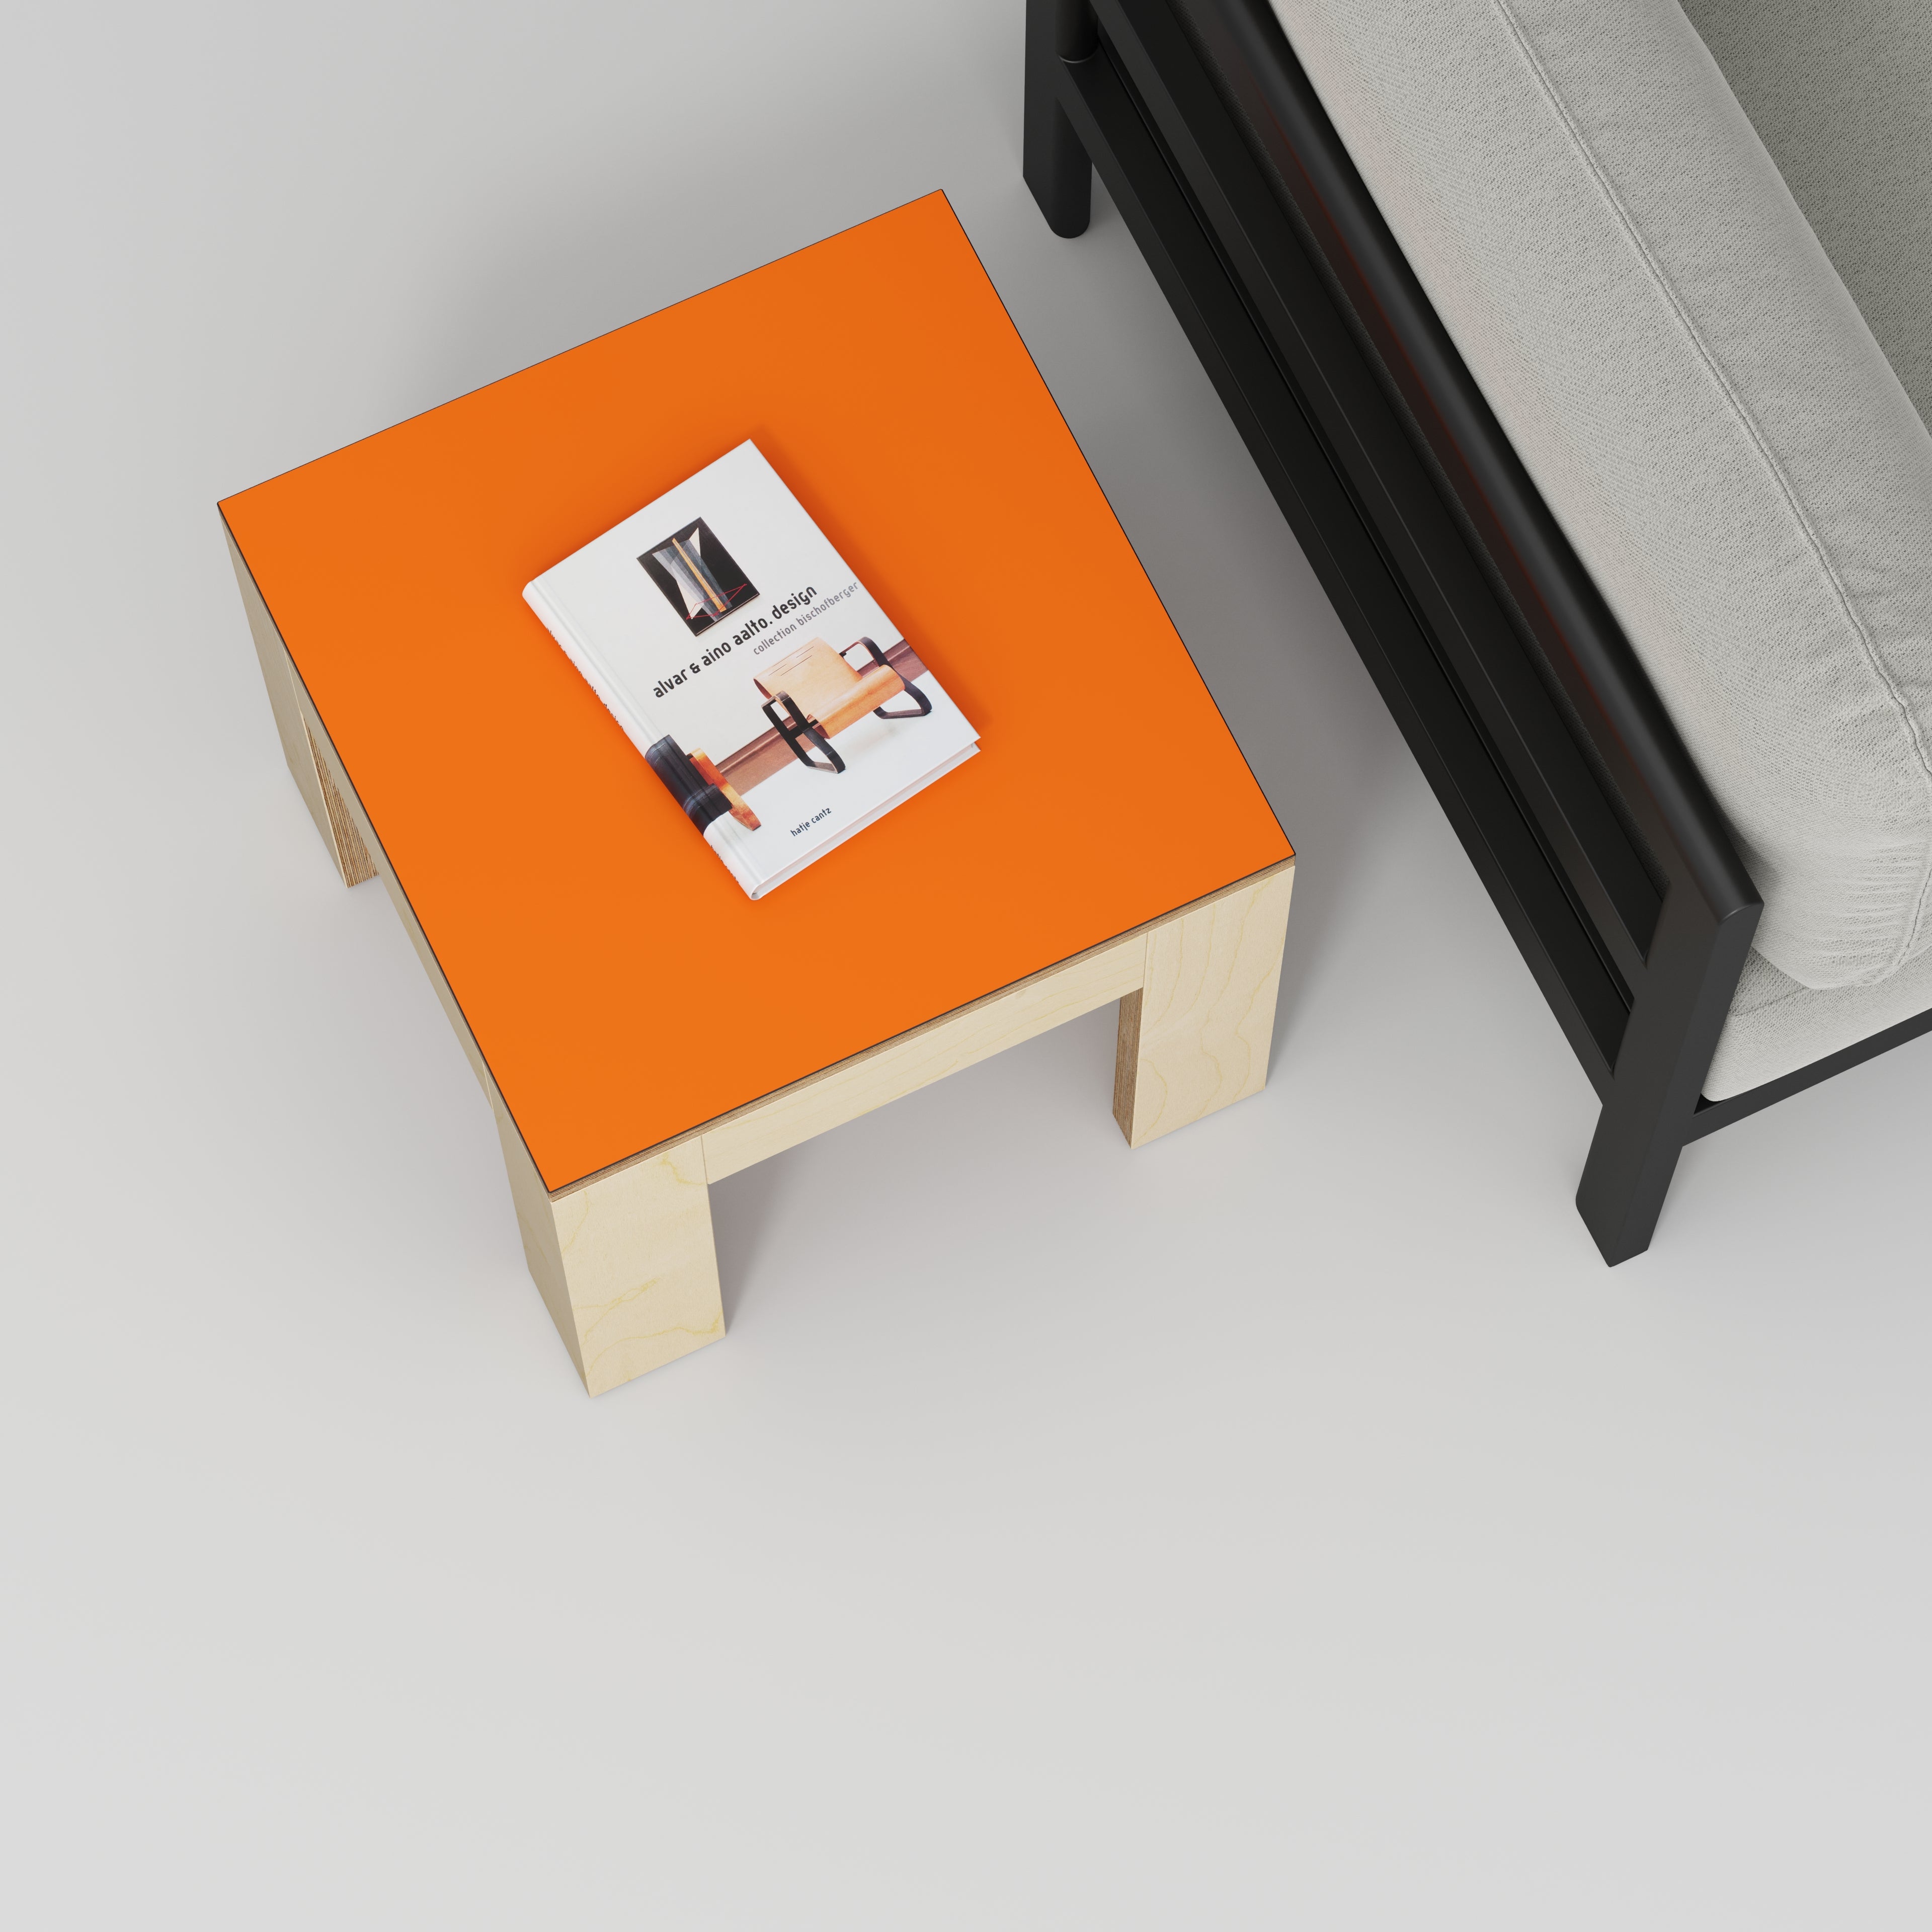 Side Table with Solid Frame - Formica Levante Orange - 500(w) x 500(d) x 450(h)